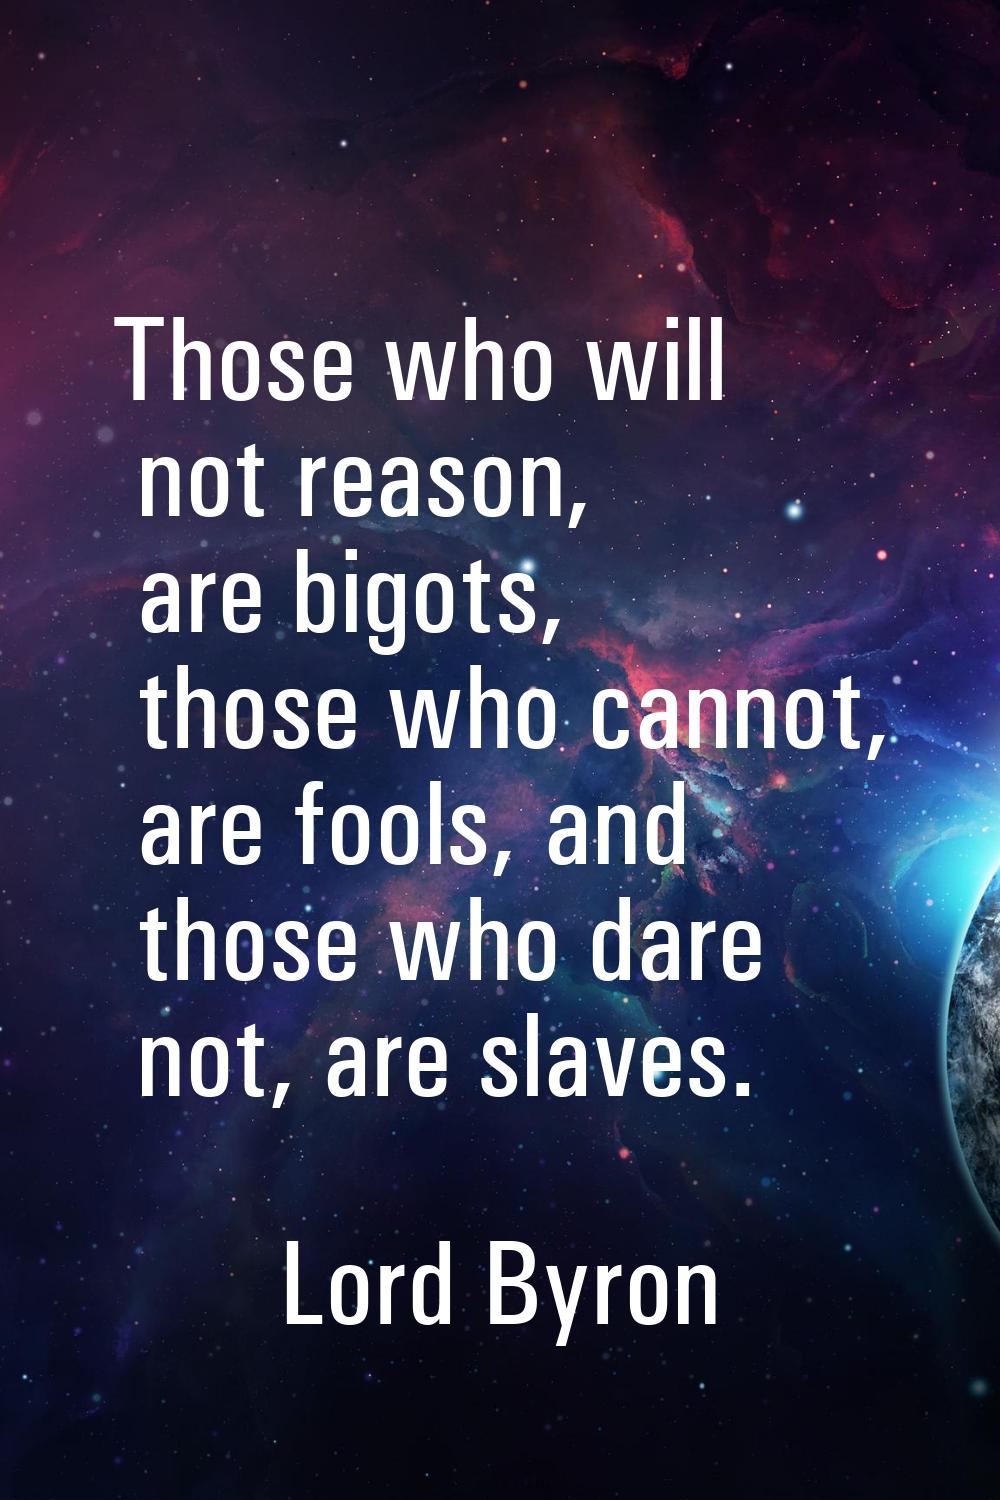 Those who will not reason, are bigots, those who cannot, are fools, and those who dare not, are sla